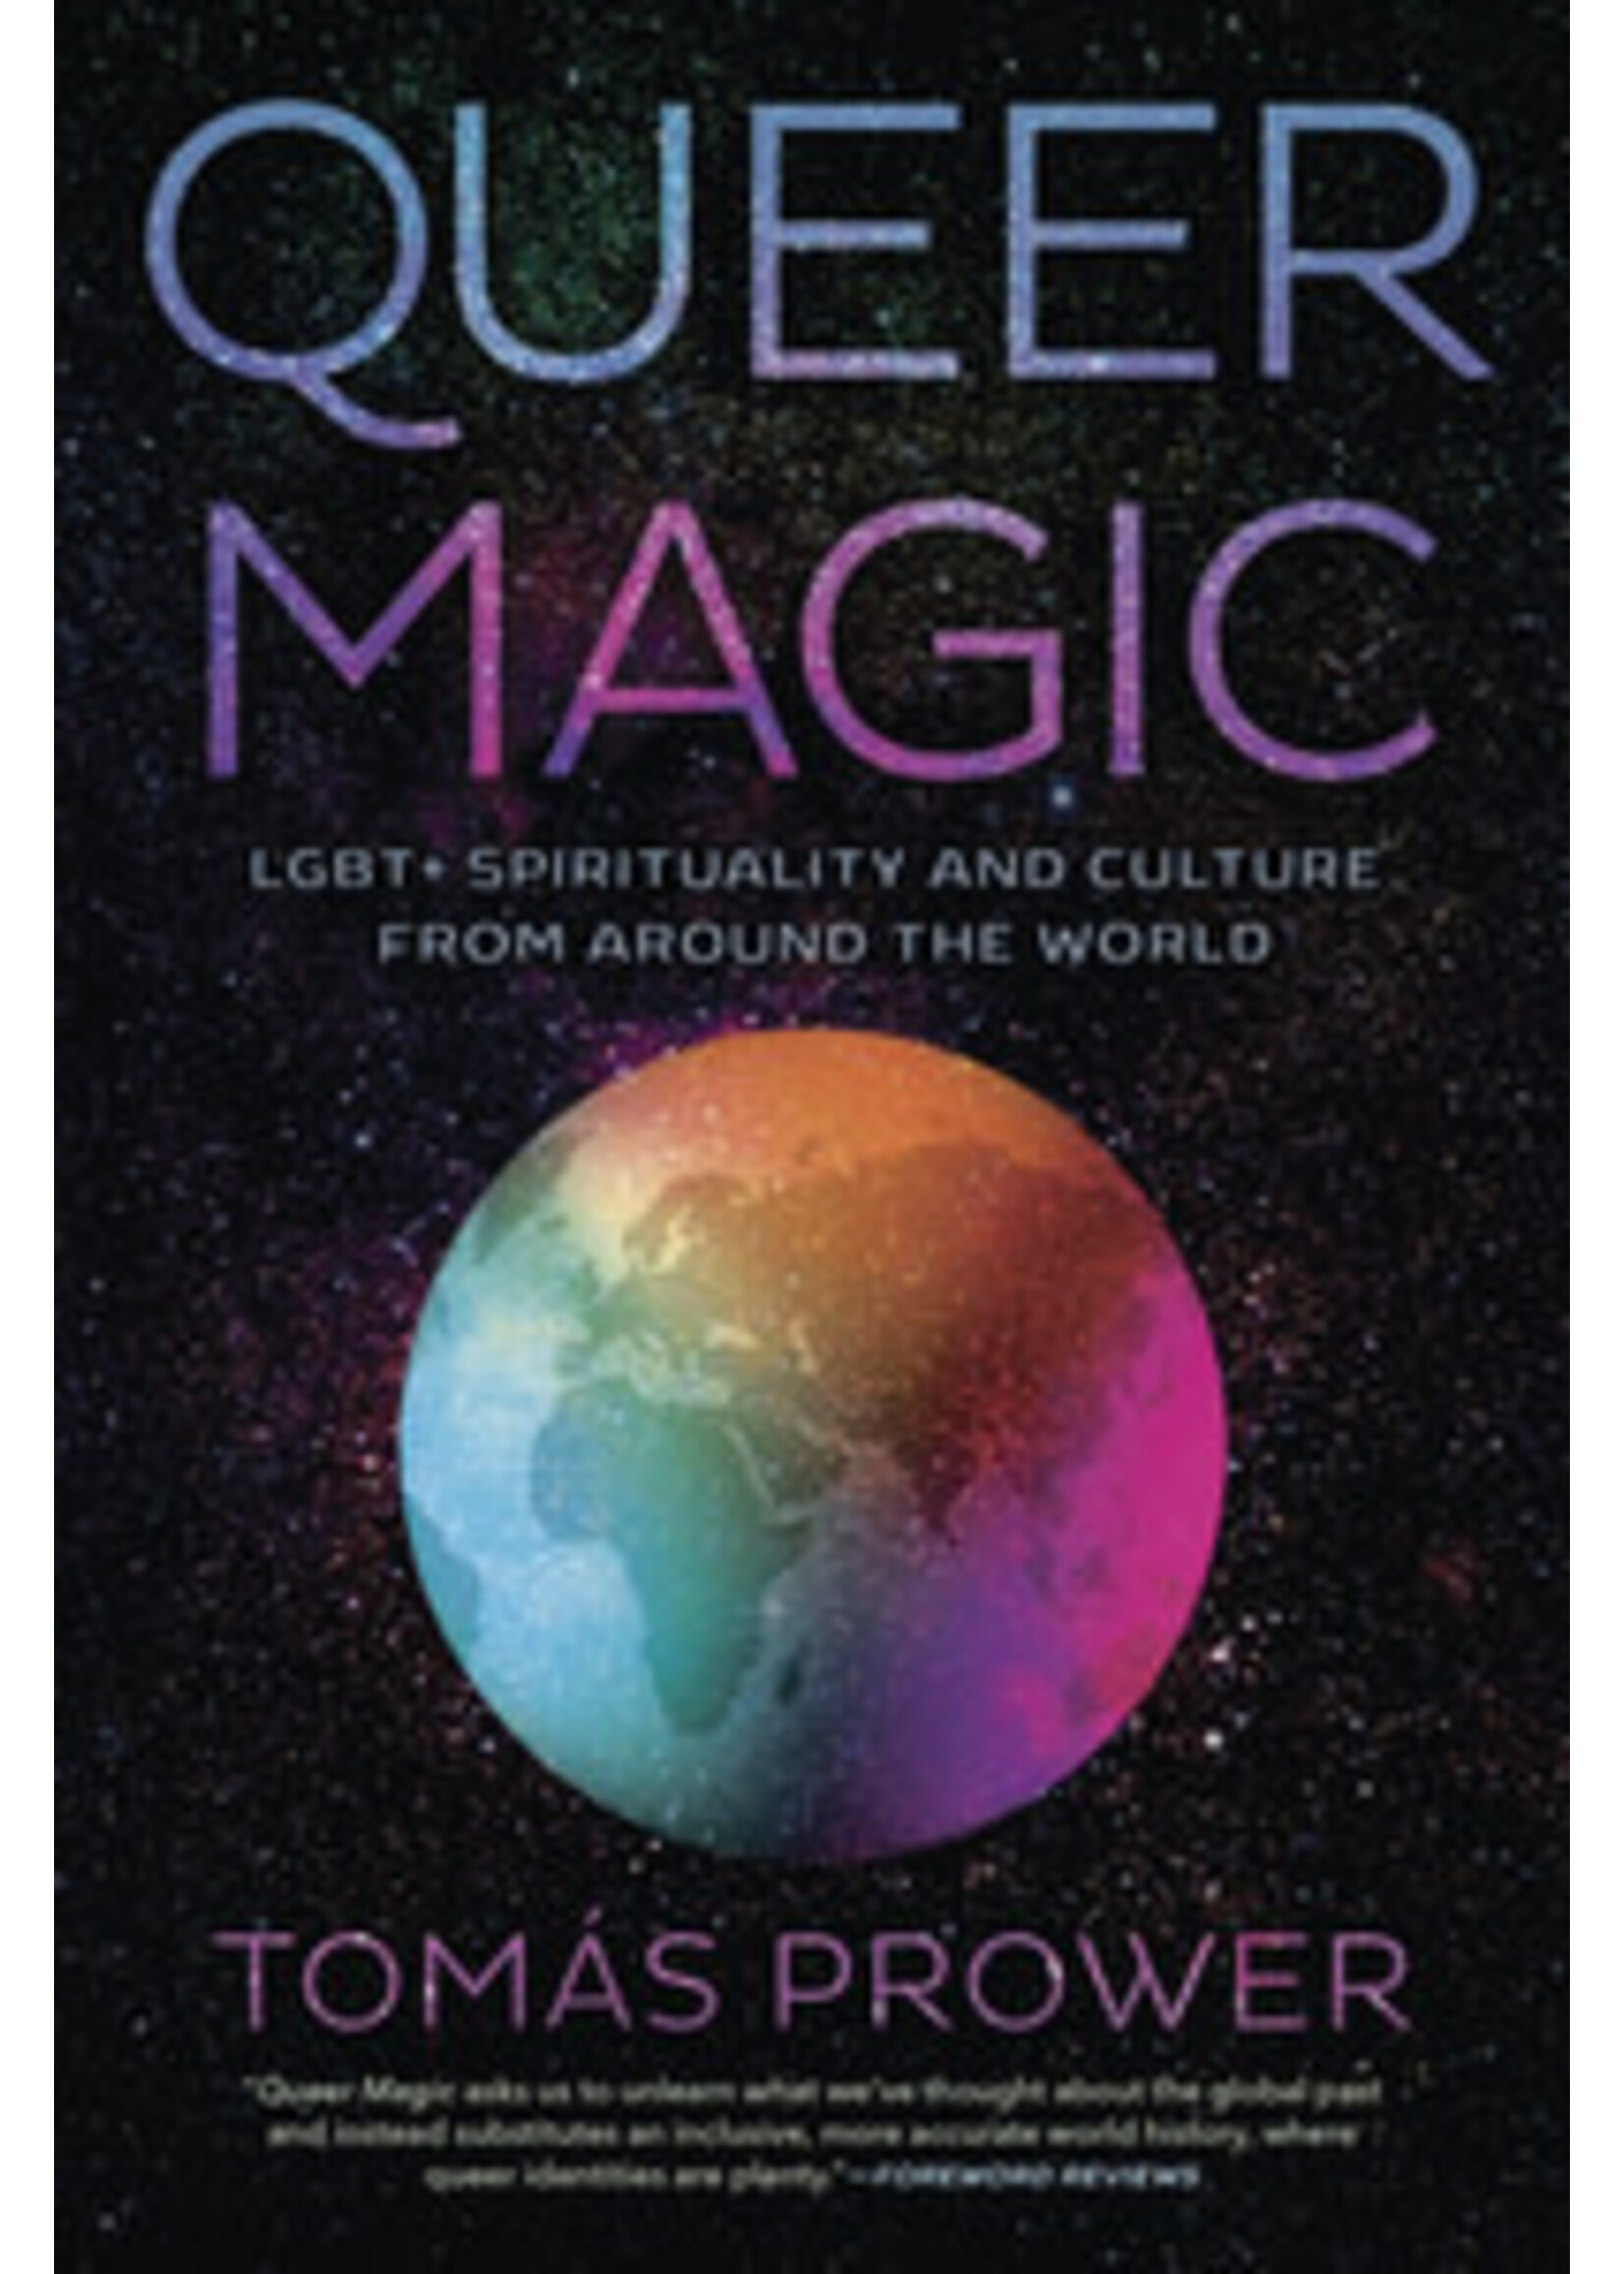 Queer Magic by Tomas Prower